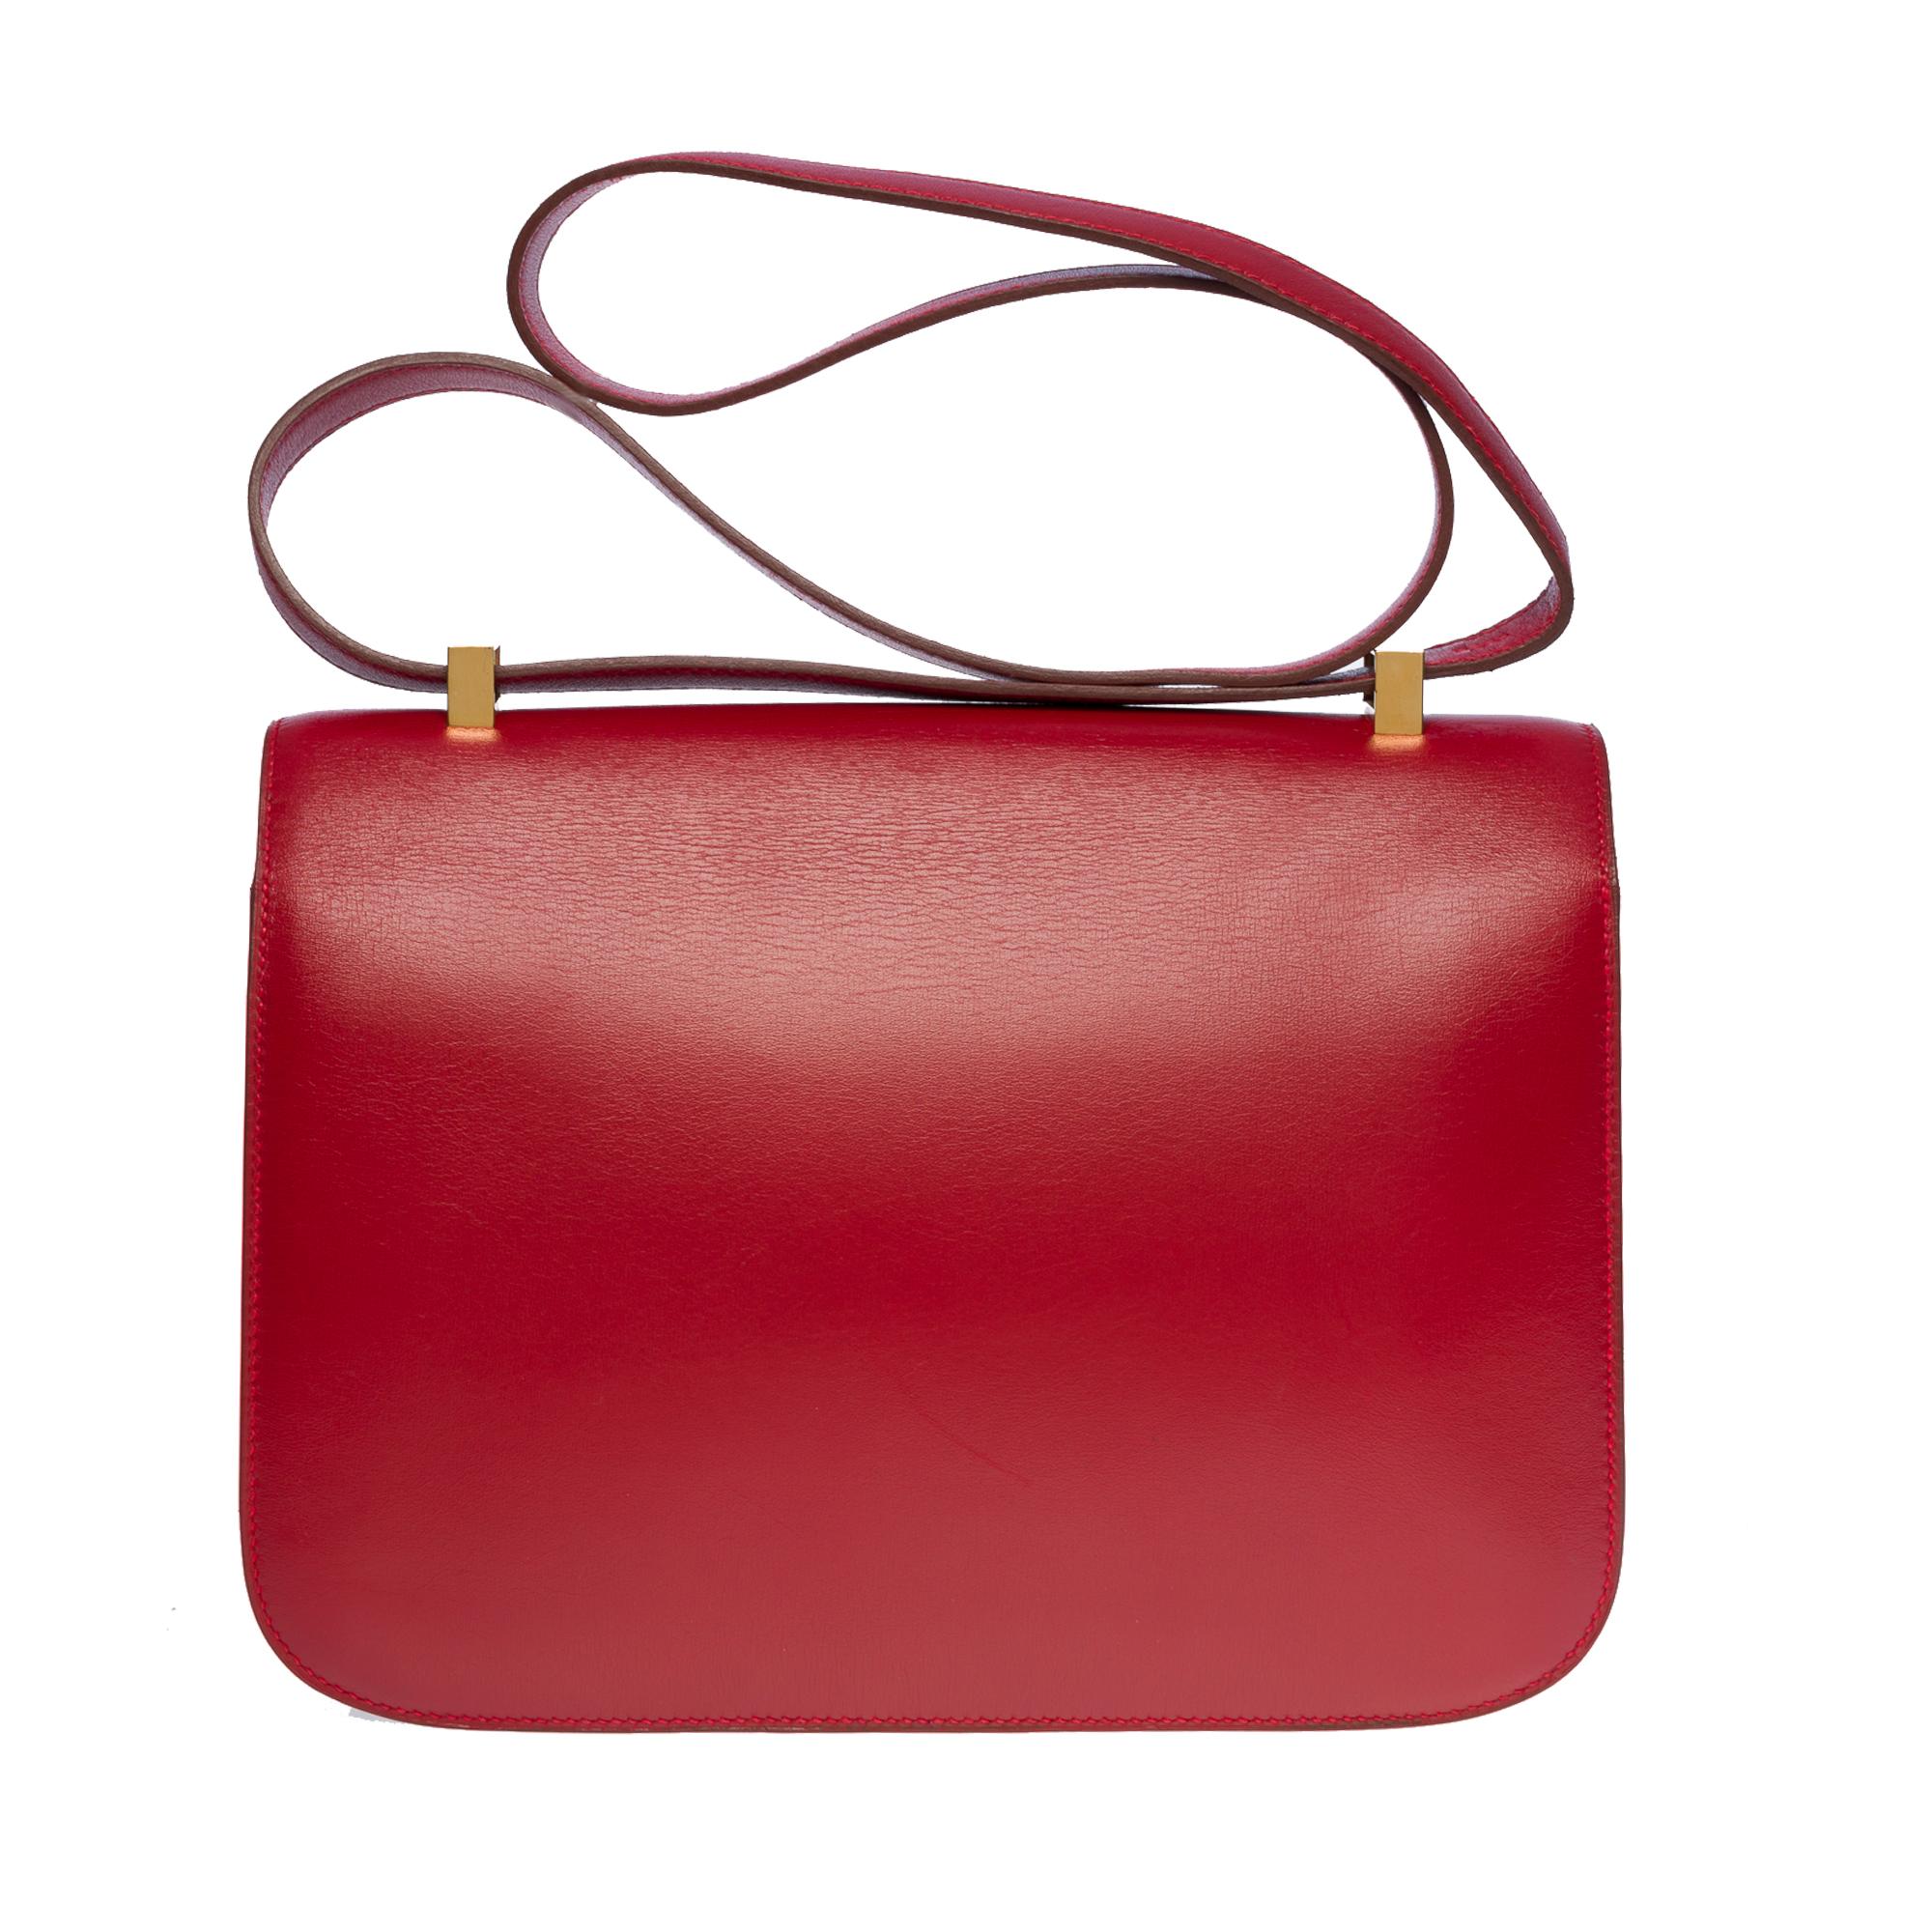 Exquisite Hermes Constance 23 shoulder bag in Red H (burgundy) boxcalf leather , gold plated metal hardware, convertible handle in burgundy leather allowing a hand or shoulder support

Closure marked H on flap
A patch pocket on the back of the